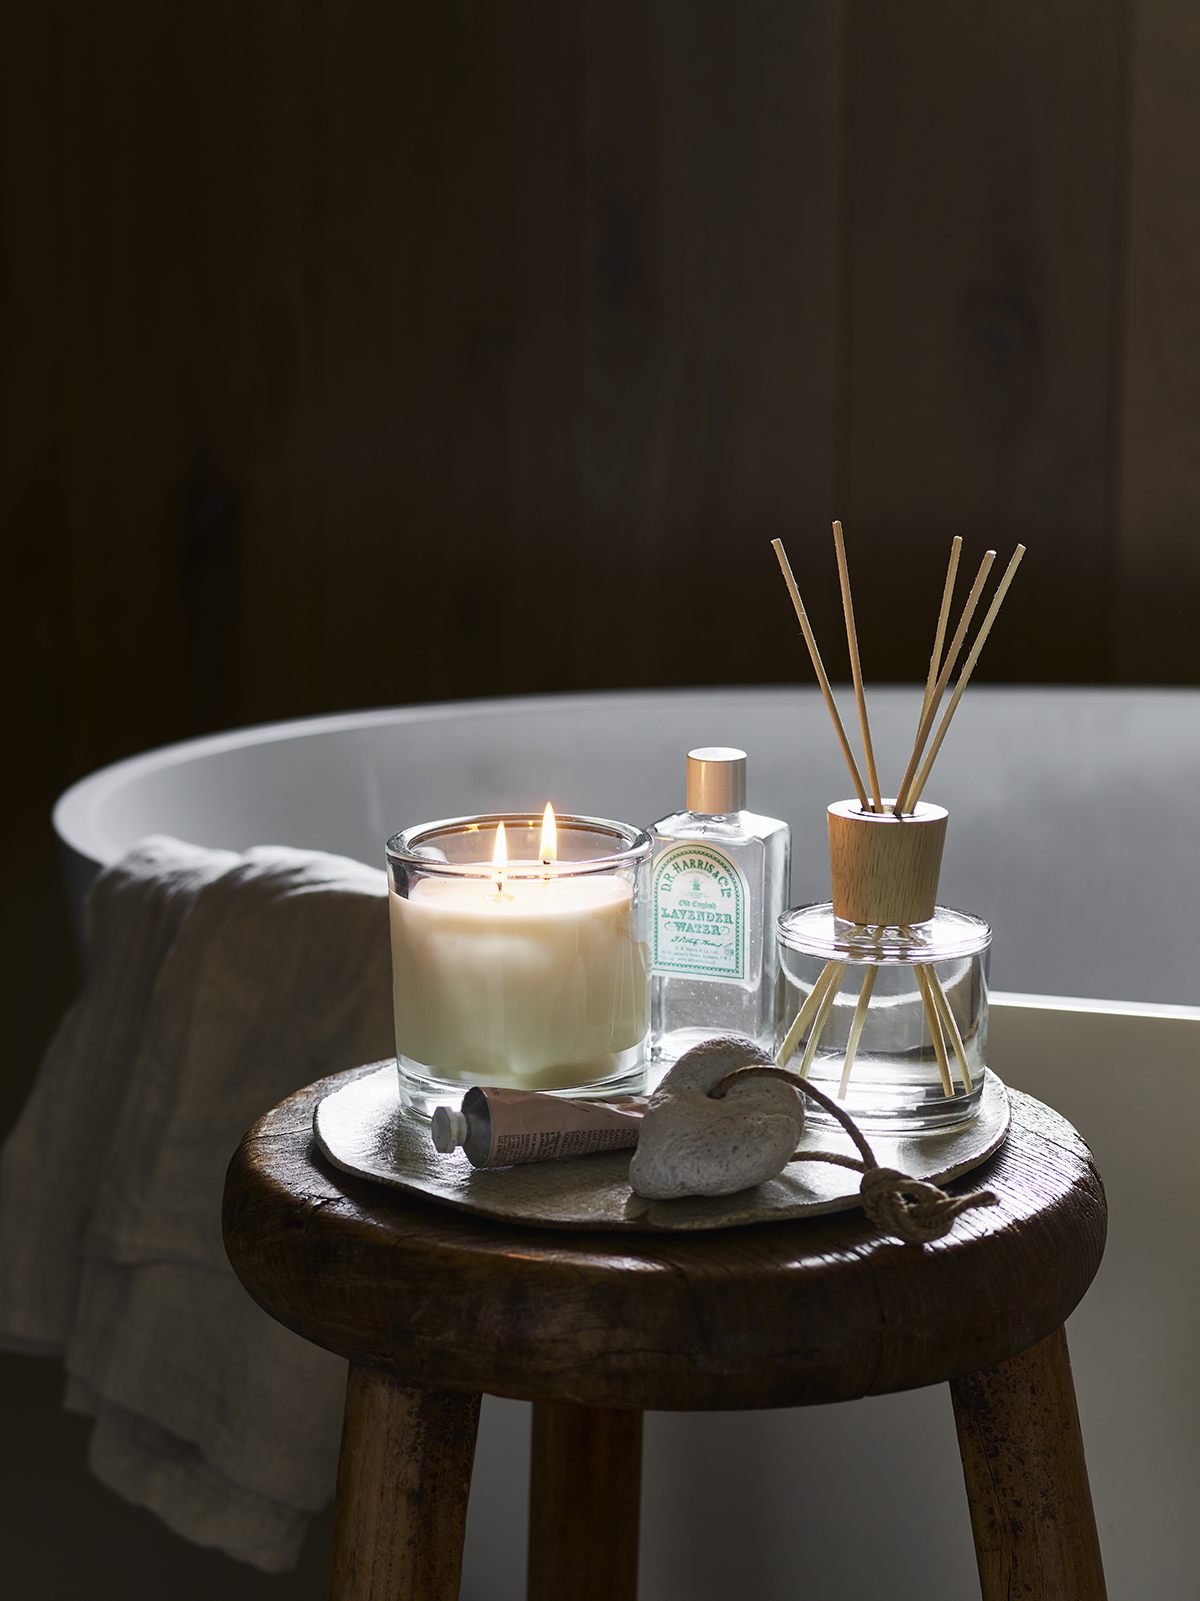 soothing aromas, spa experience at home, candles, reed diffusers, lavender, self care, wellbeing